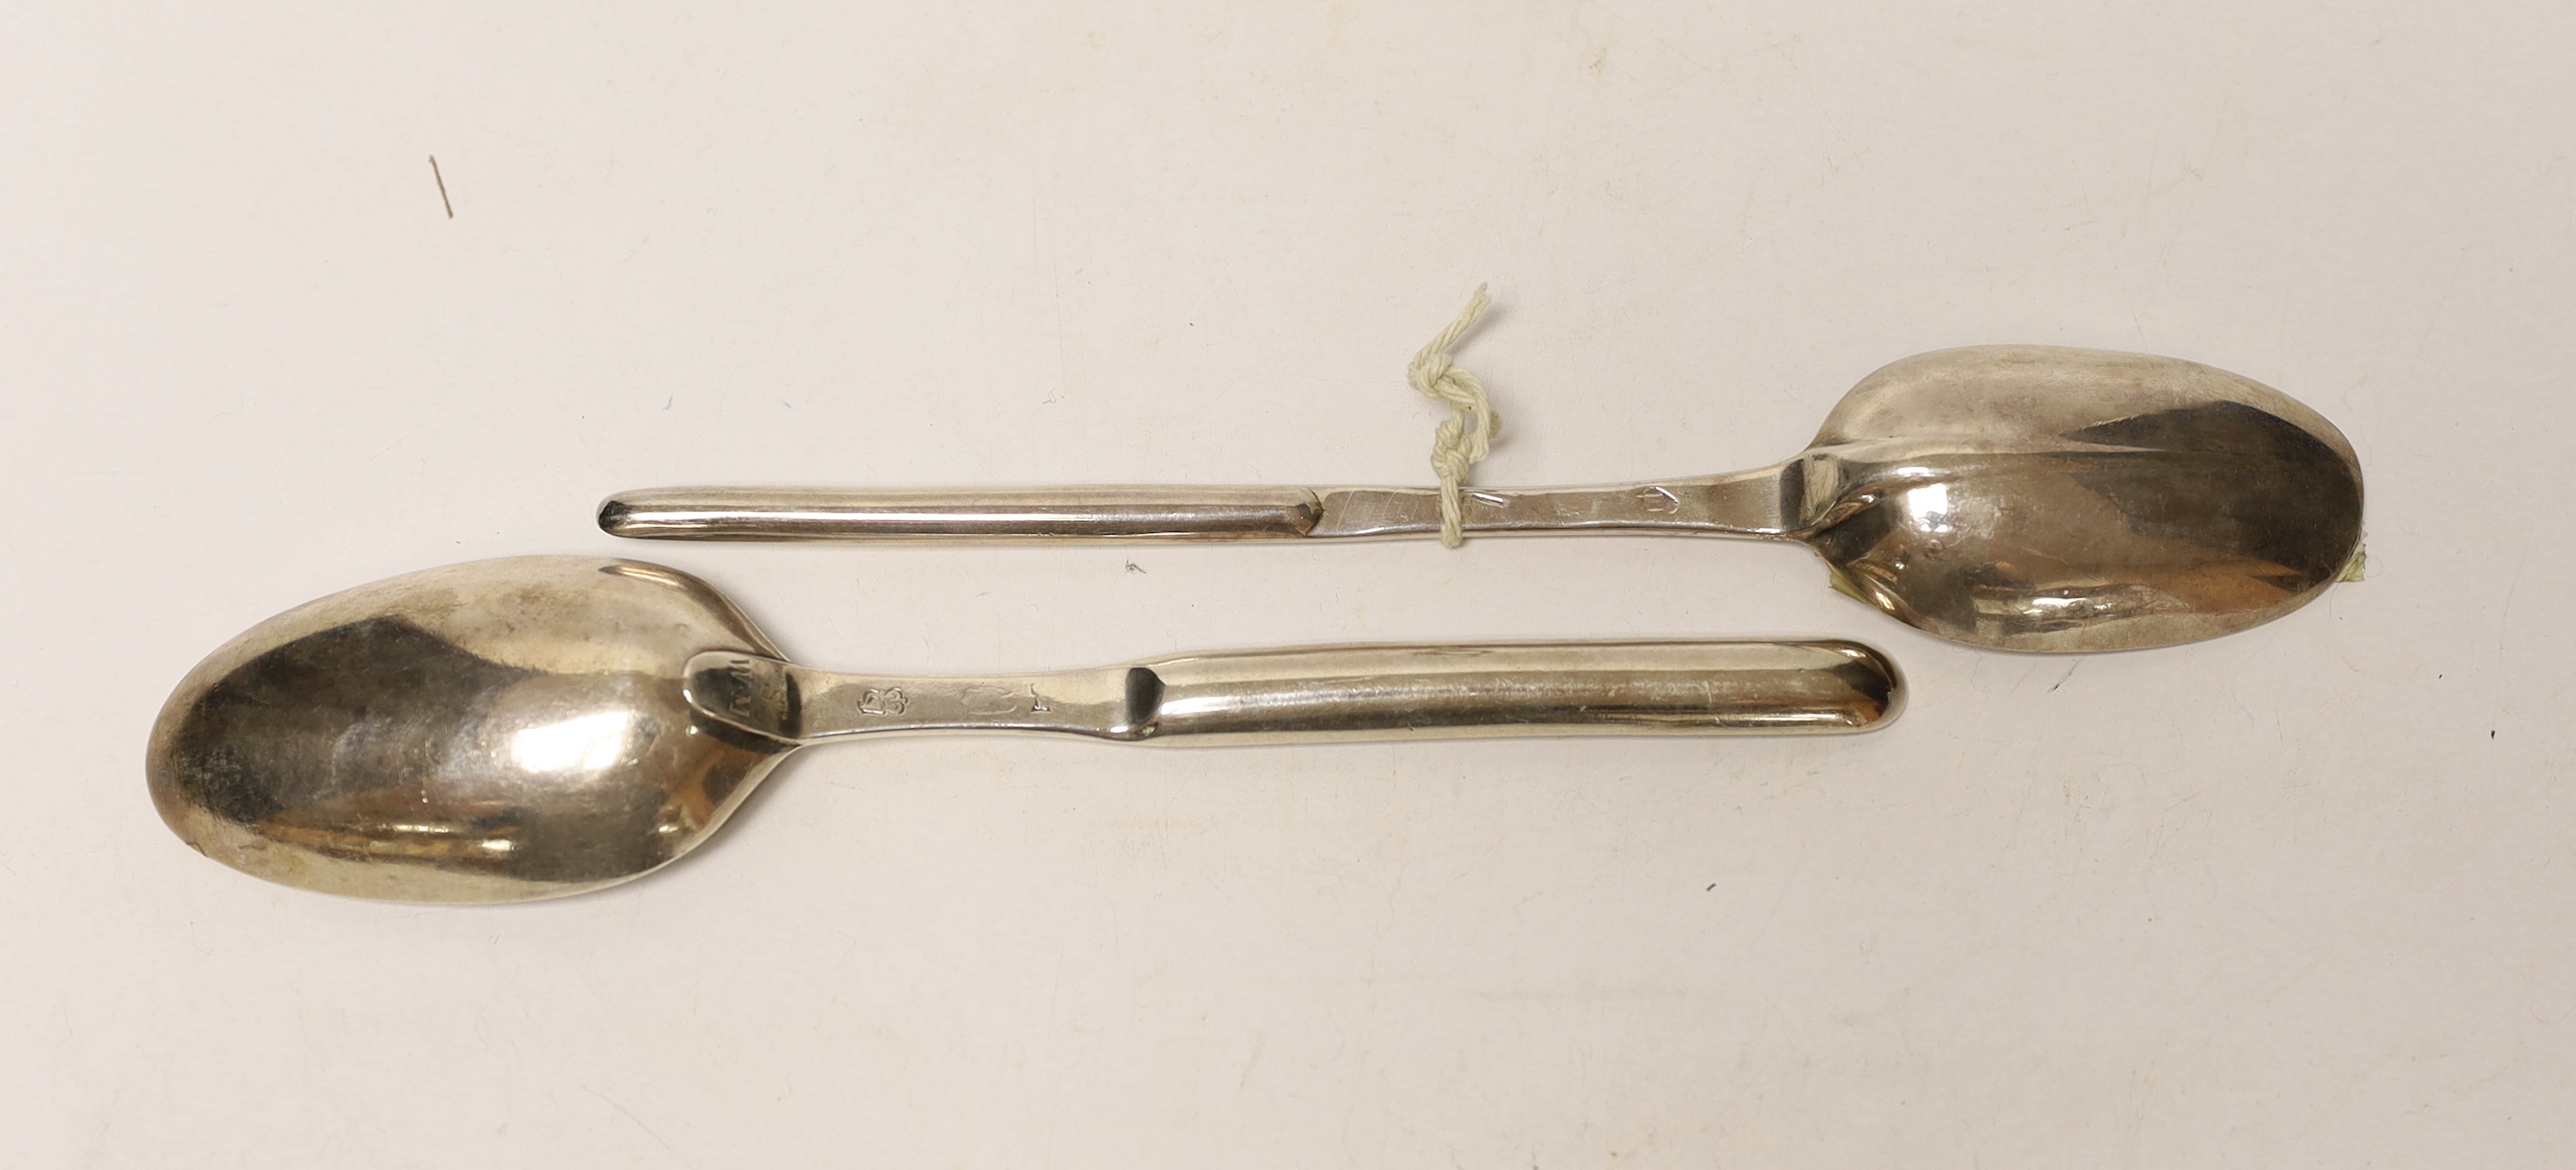 Two mid 18th century Irish silver combination marrow scoop spoons, marks rubbed, longest 22.8cm, 126 grams.